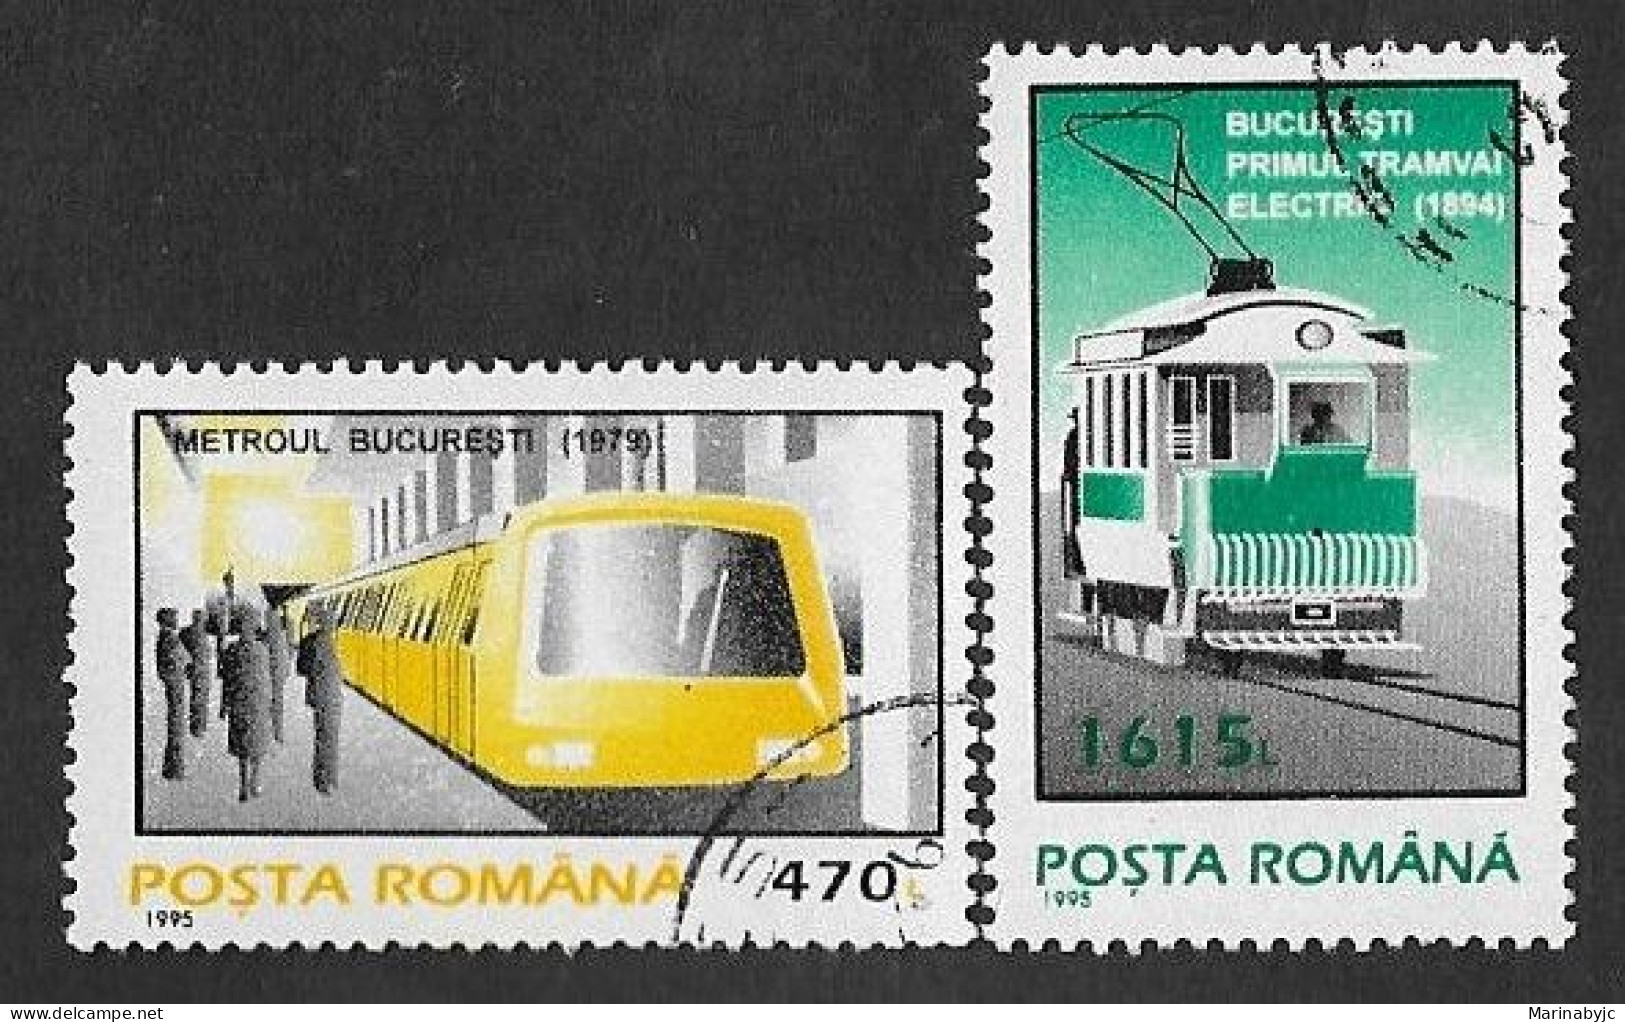 SE)1995 ROMANIA, FROM THE TRAINS SERIES, THE BUCHAREST METRO, 1ST ELECTRIC TRAIN, 2 CTO STAMPS - Oblitérés